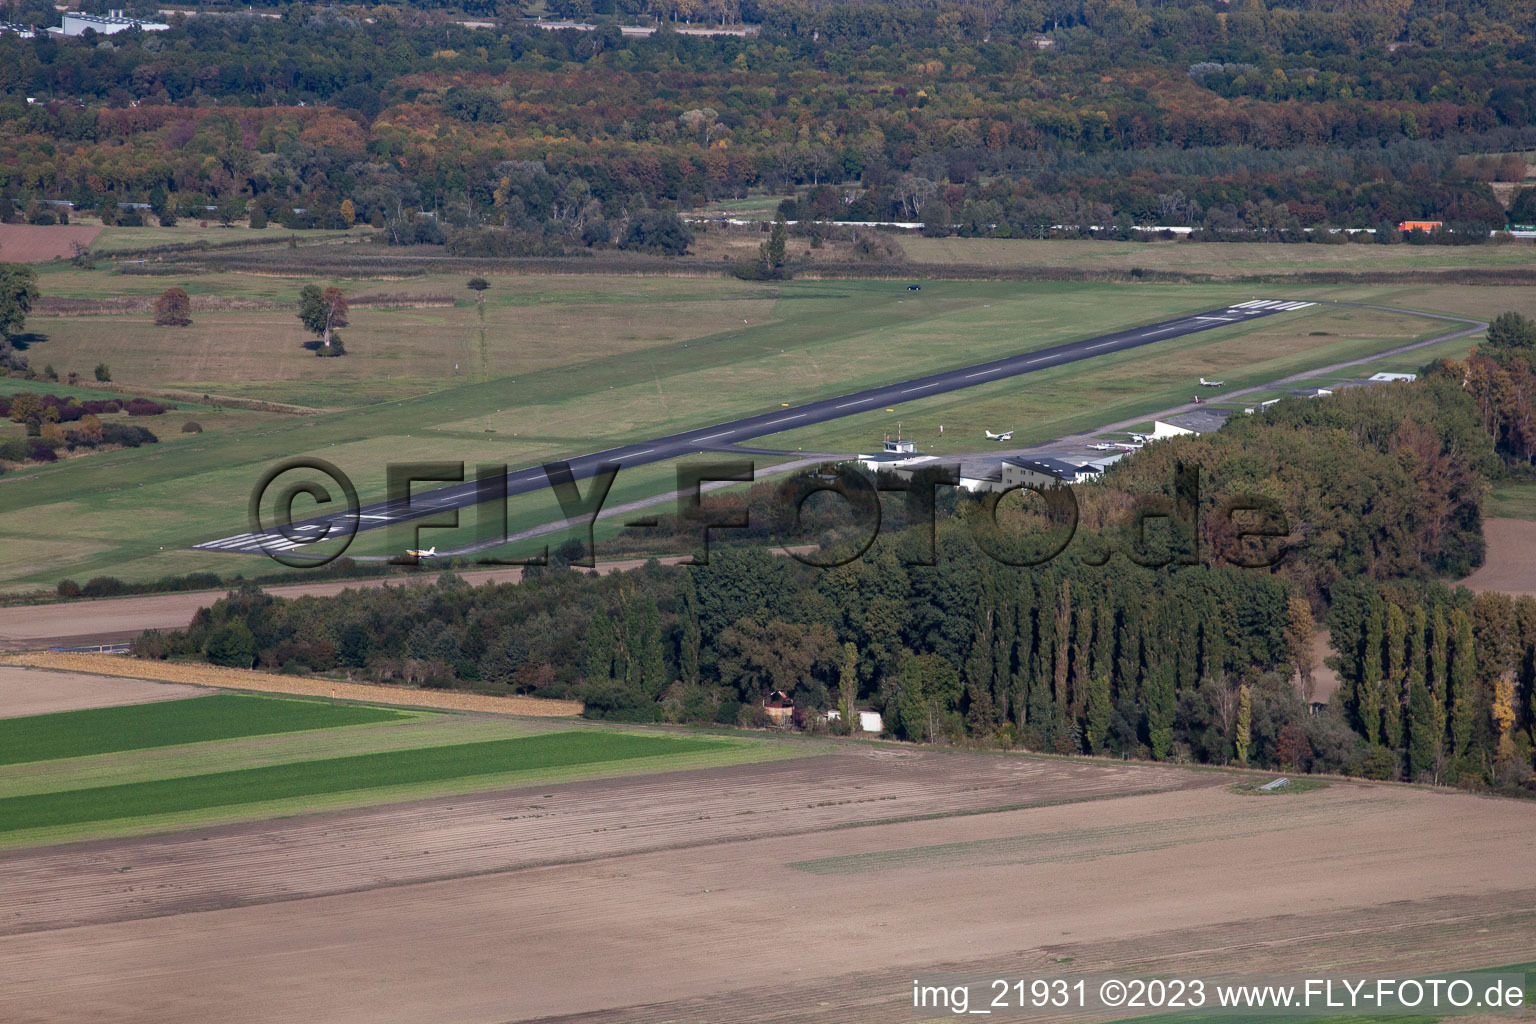 Aerial view of Airfield in Worms in the state Rhineland-Palatinate, Germany